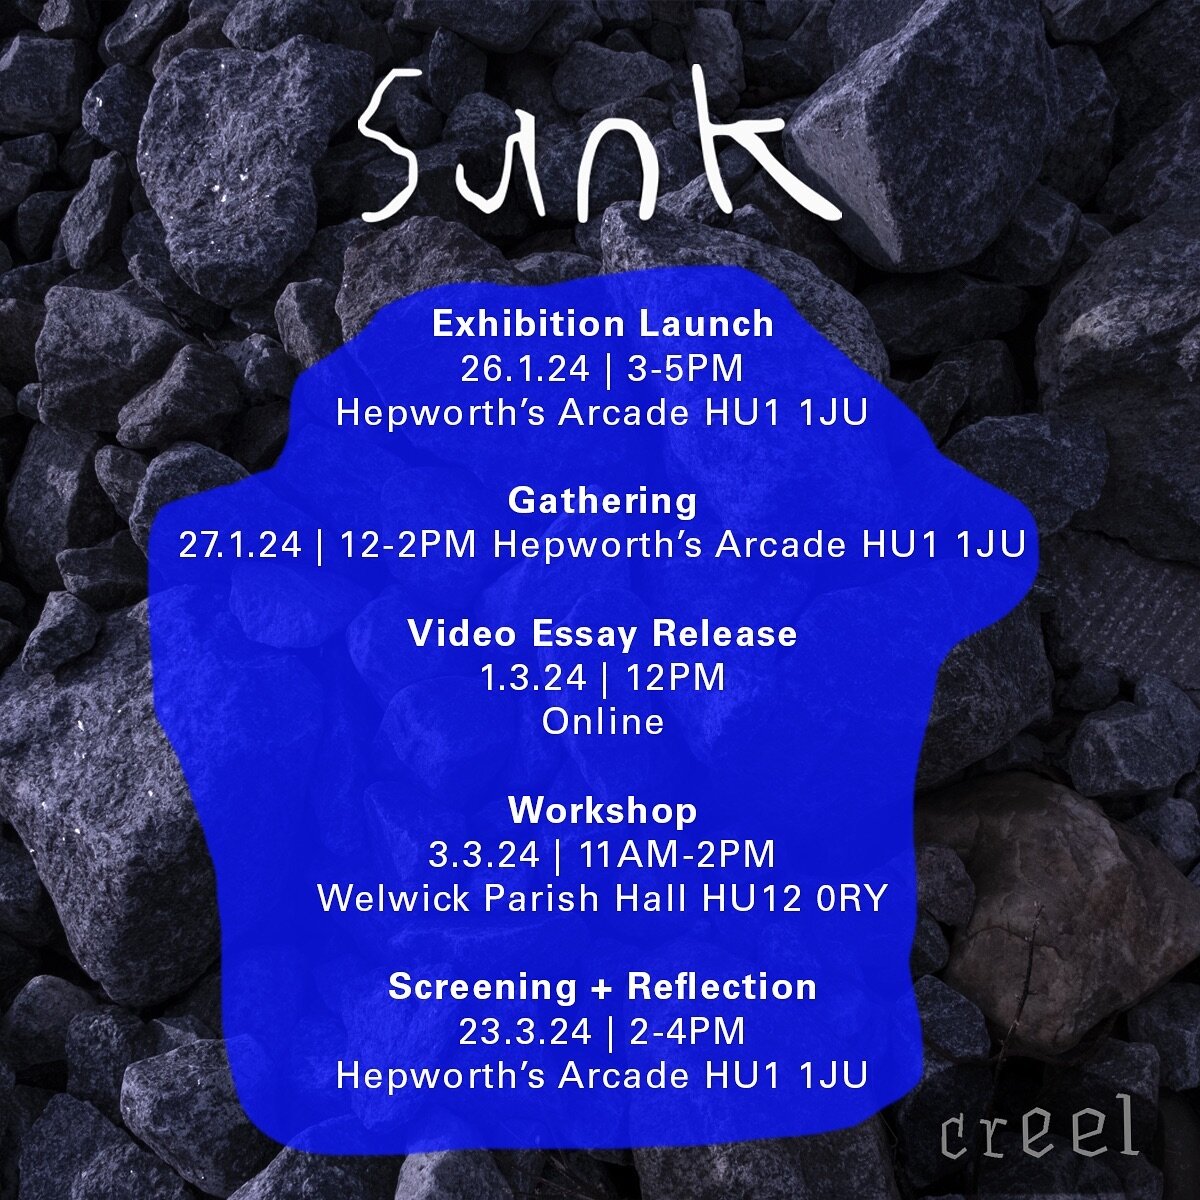 S U N K launches this Friday with a physical exhibition in Hepworth's Arcade, and an online component featuring conversations around ecological belief from contrasting perspectives, as well as opportunities for response, and further reading. 

All ev